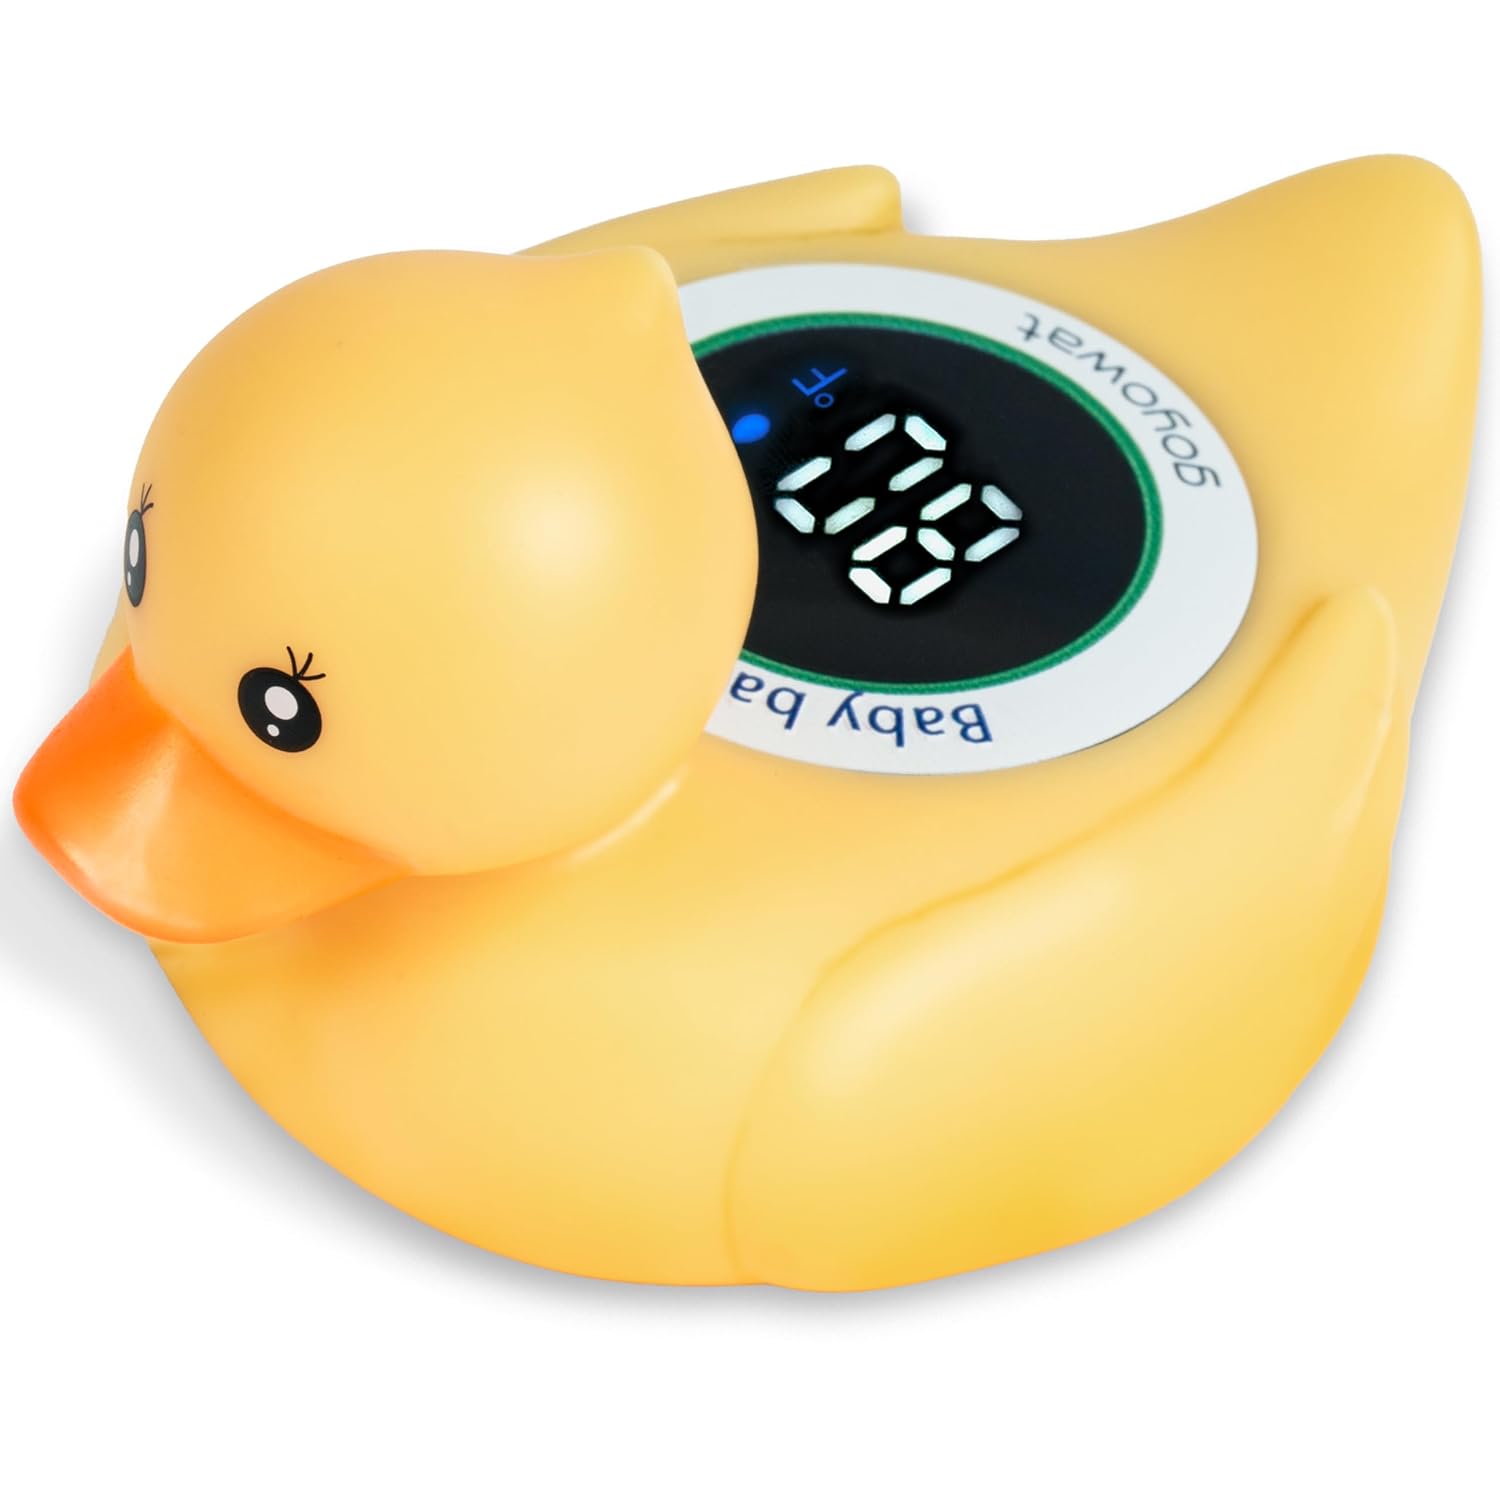 Baby Bath Thermometer,Newborn Swimming Safety Toy Thermometer,Bathtub Water Thermometer,Duck Baby Temperature Warning,Tub Floating Toy,LED Display Warning